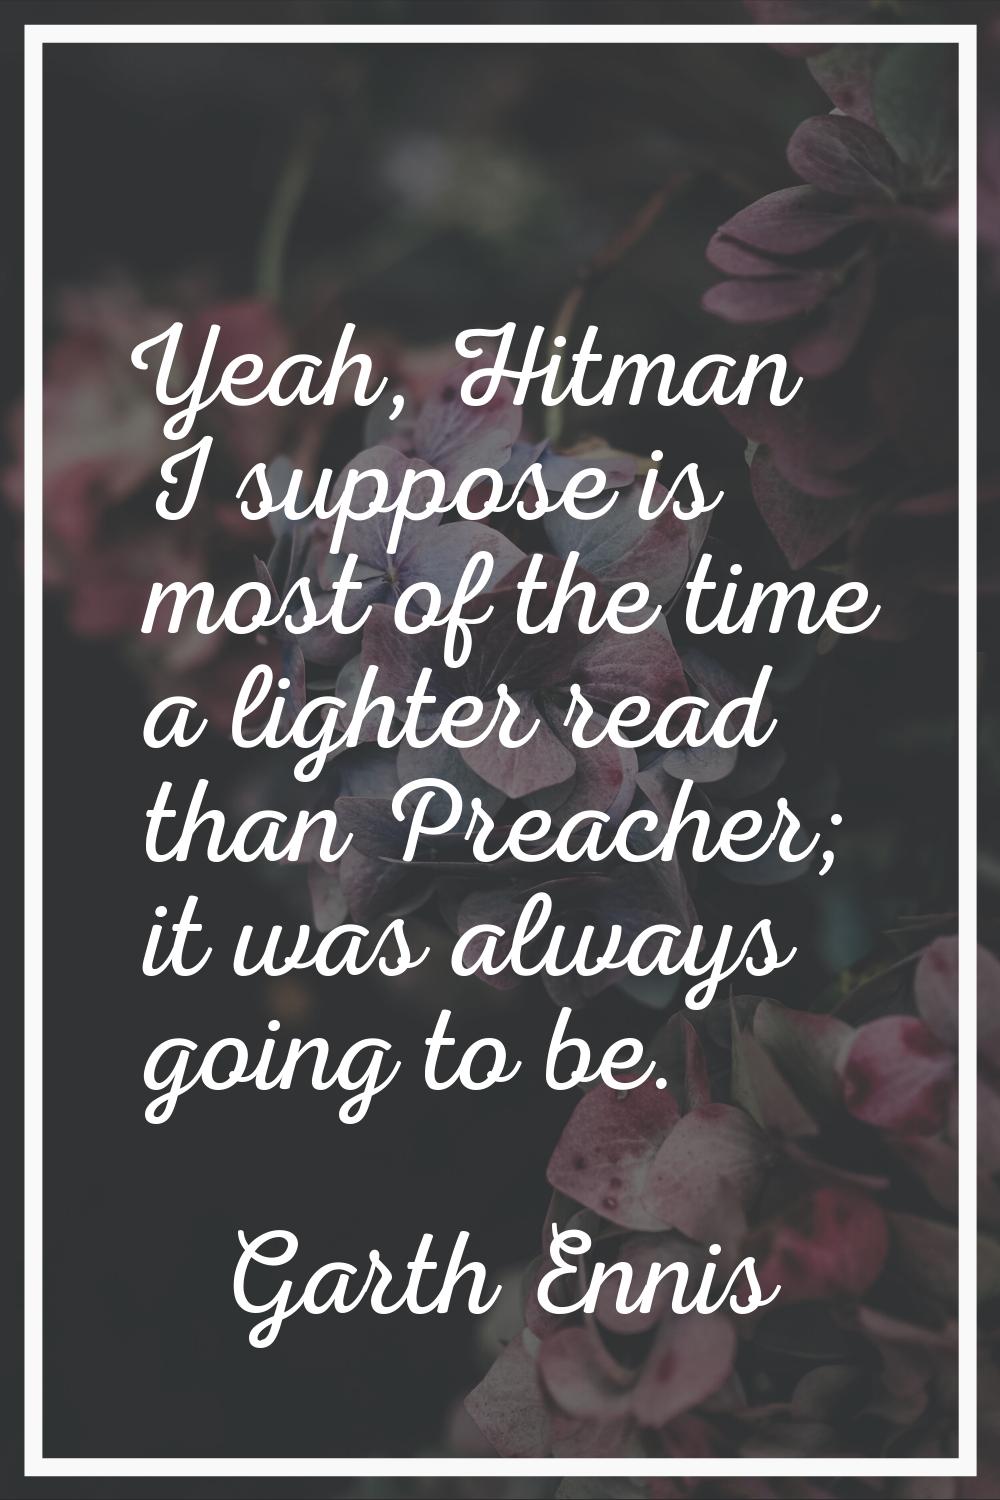 Yeah, Hitman I suppose is most of the time a lighter read than Preacher; it was always going to be.